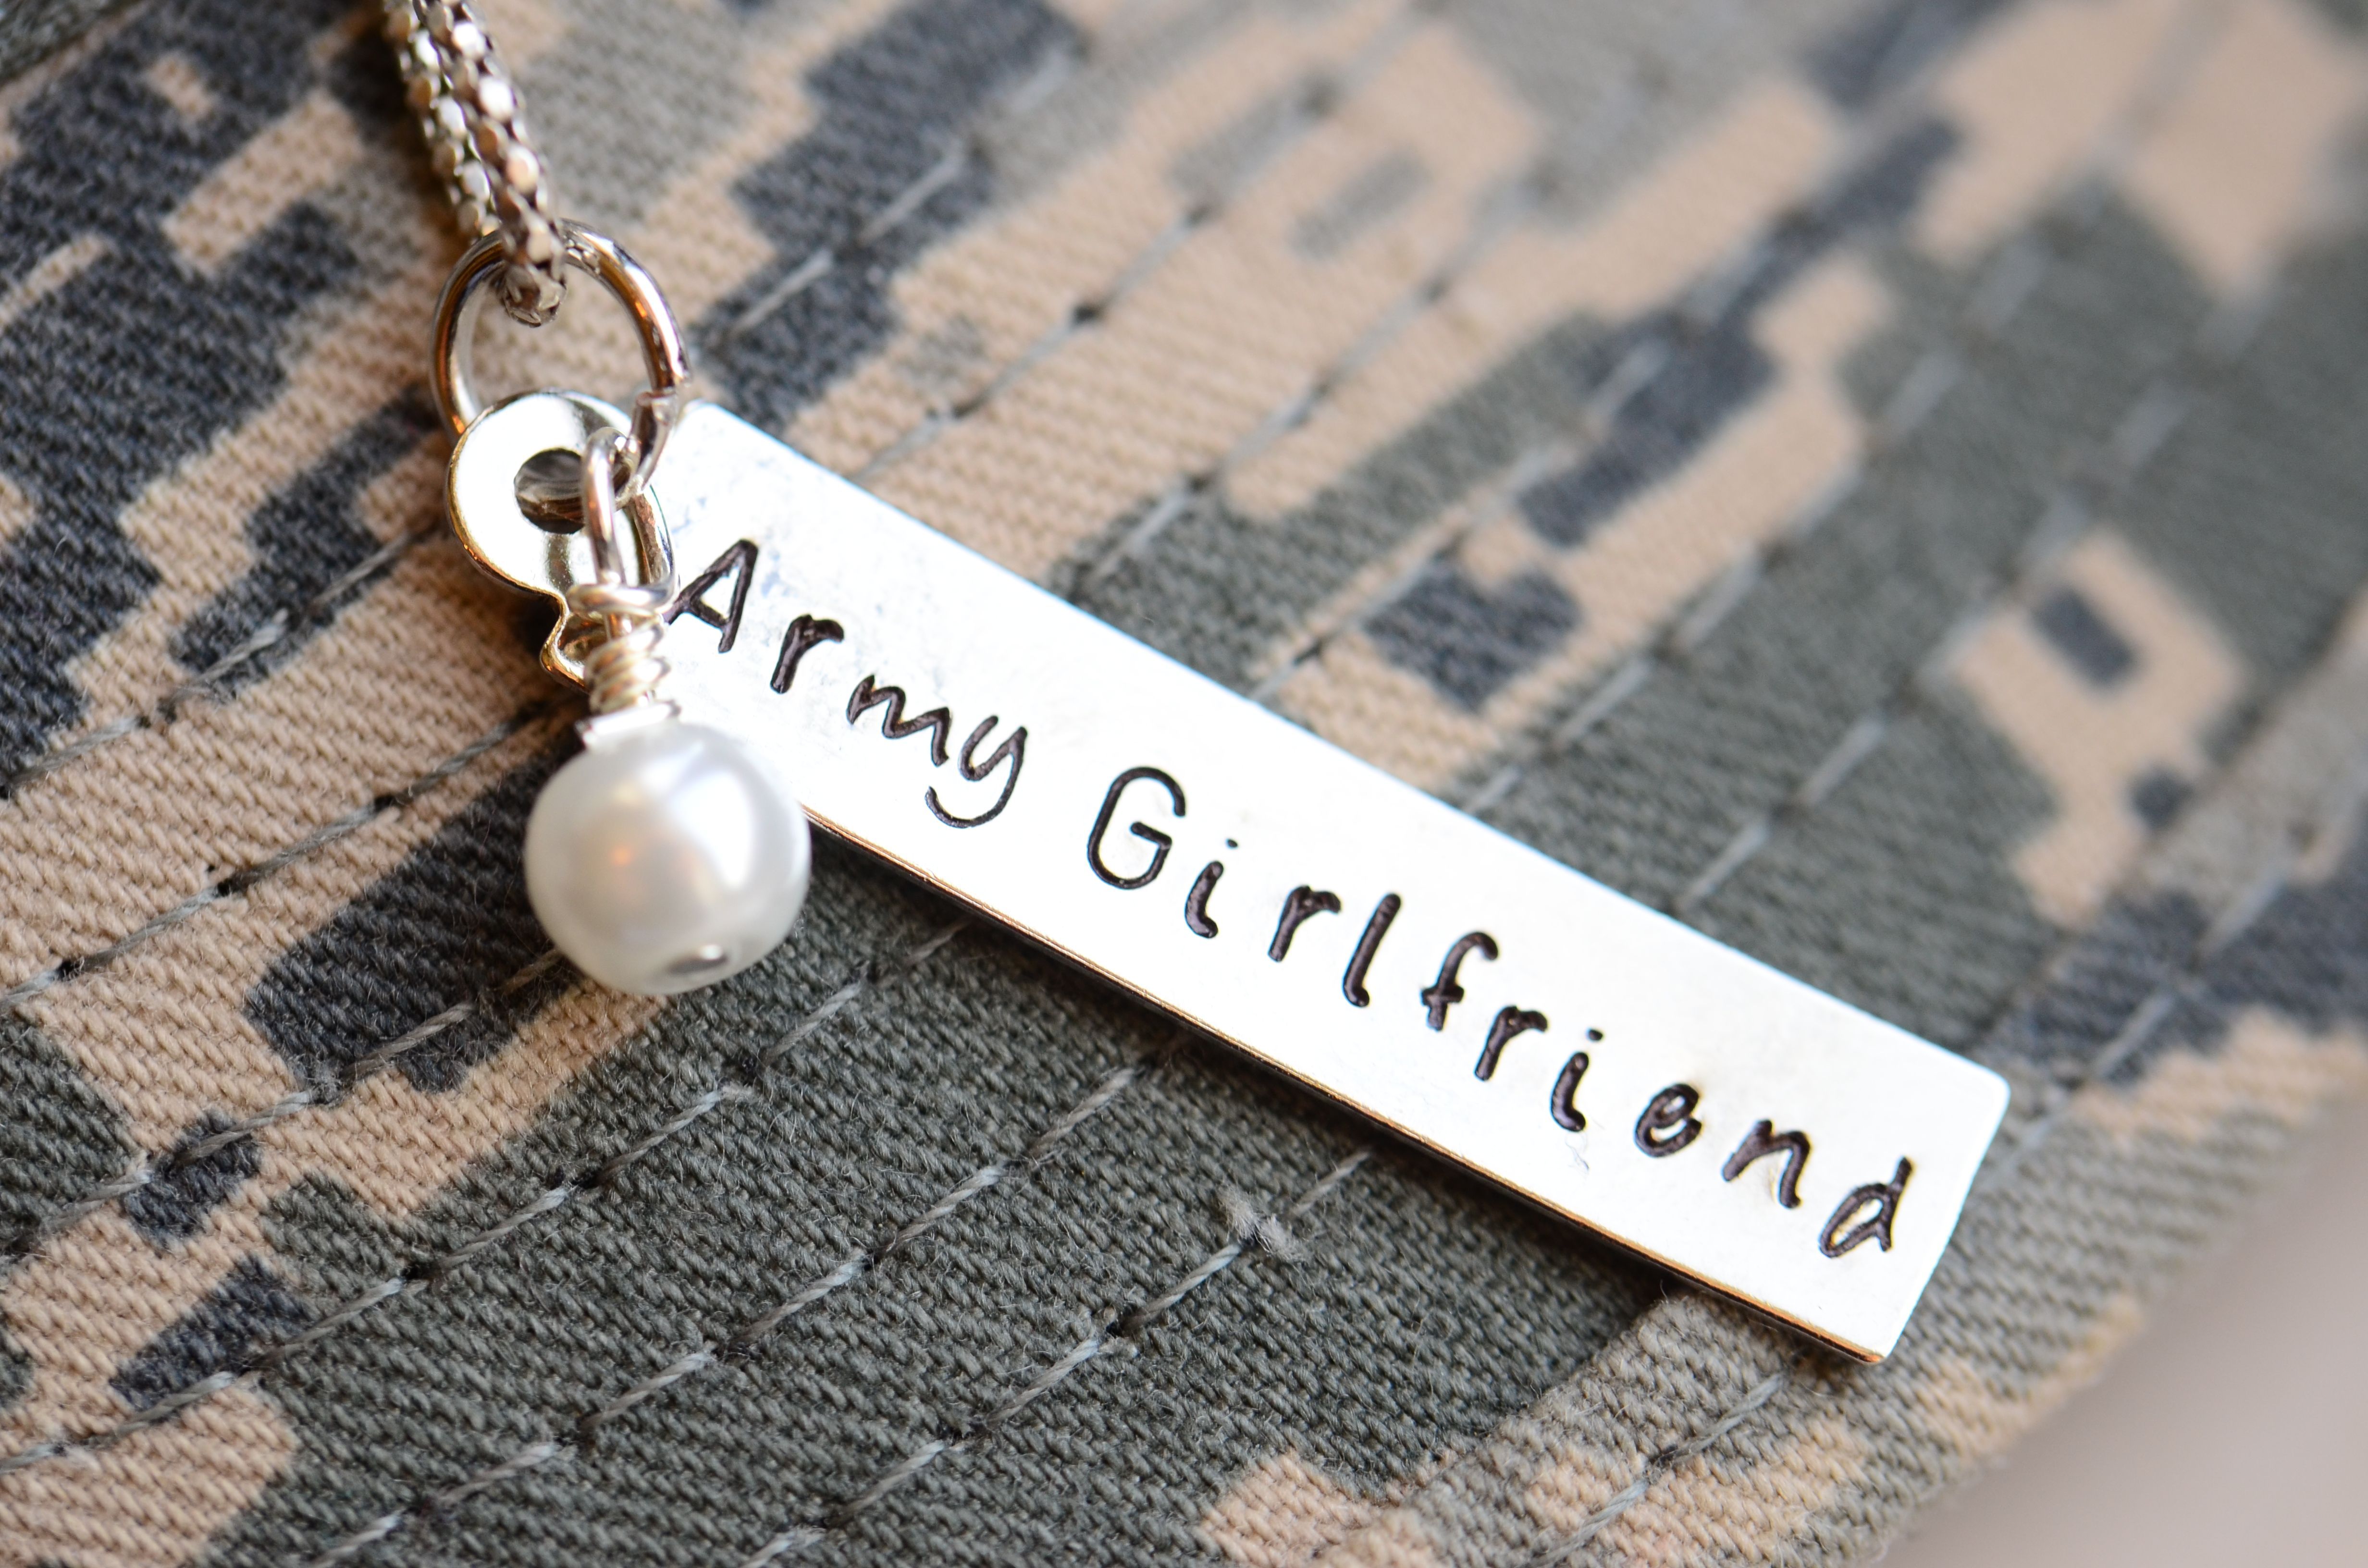 Army Girlfriend Wallpapers